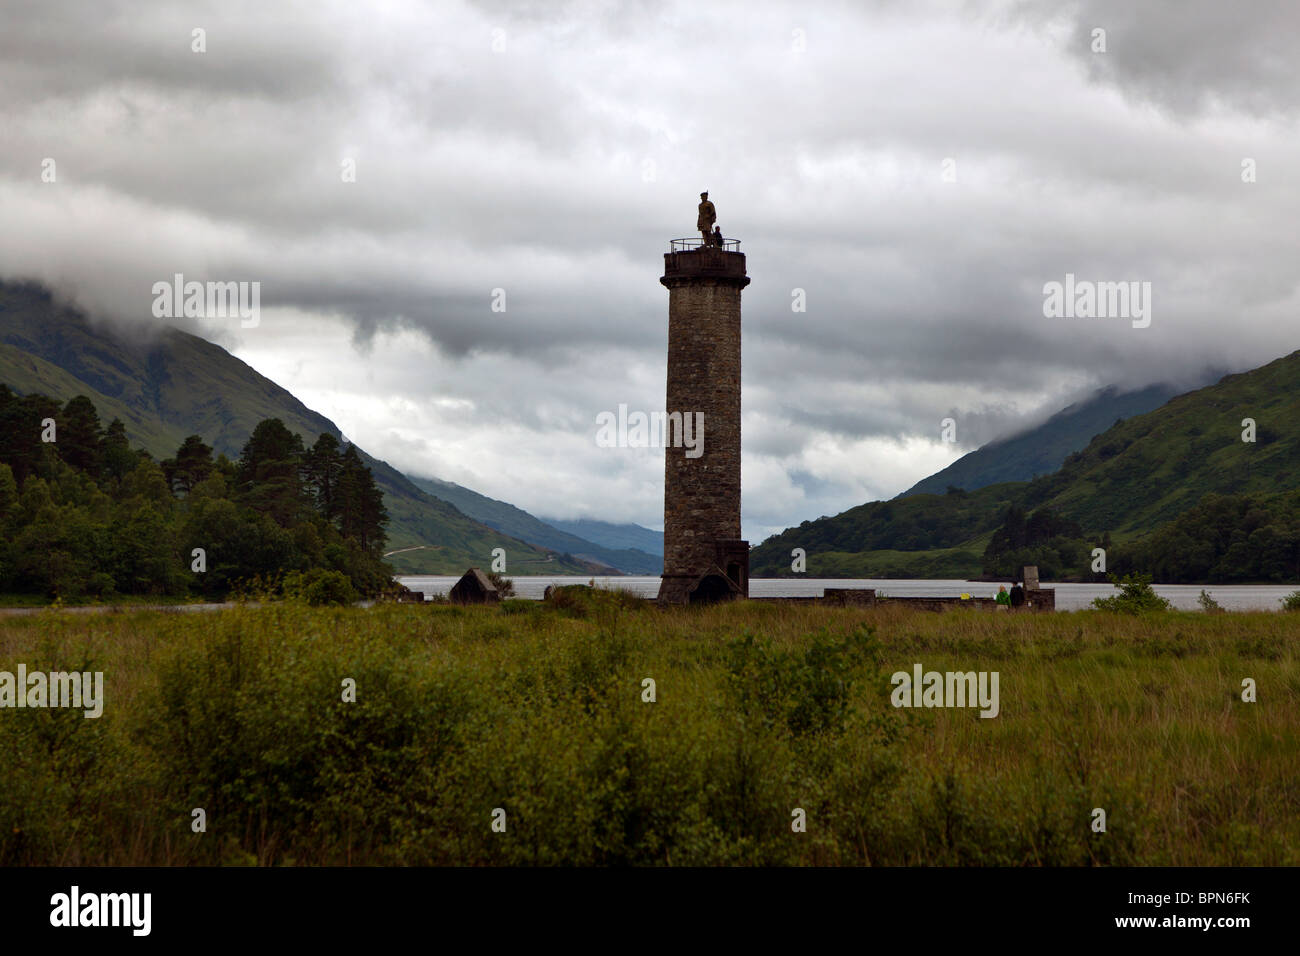 The Glenfinnan Monument (1815) at Loch Shiel where Bonnie Prince Charlie raised his standard, at the 1745 Jacobite Rising Stock Photo